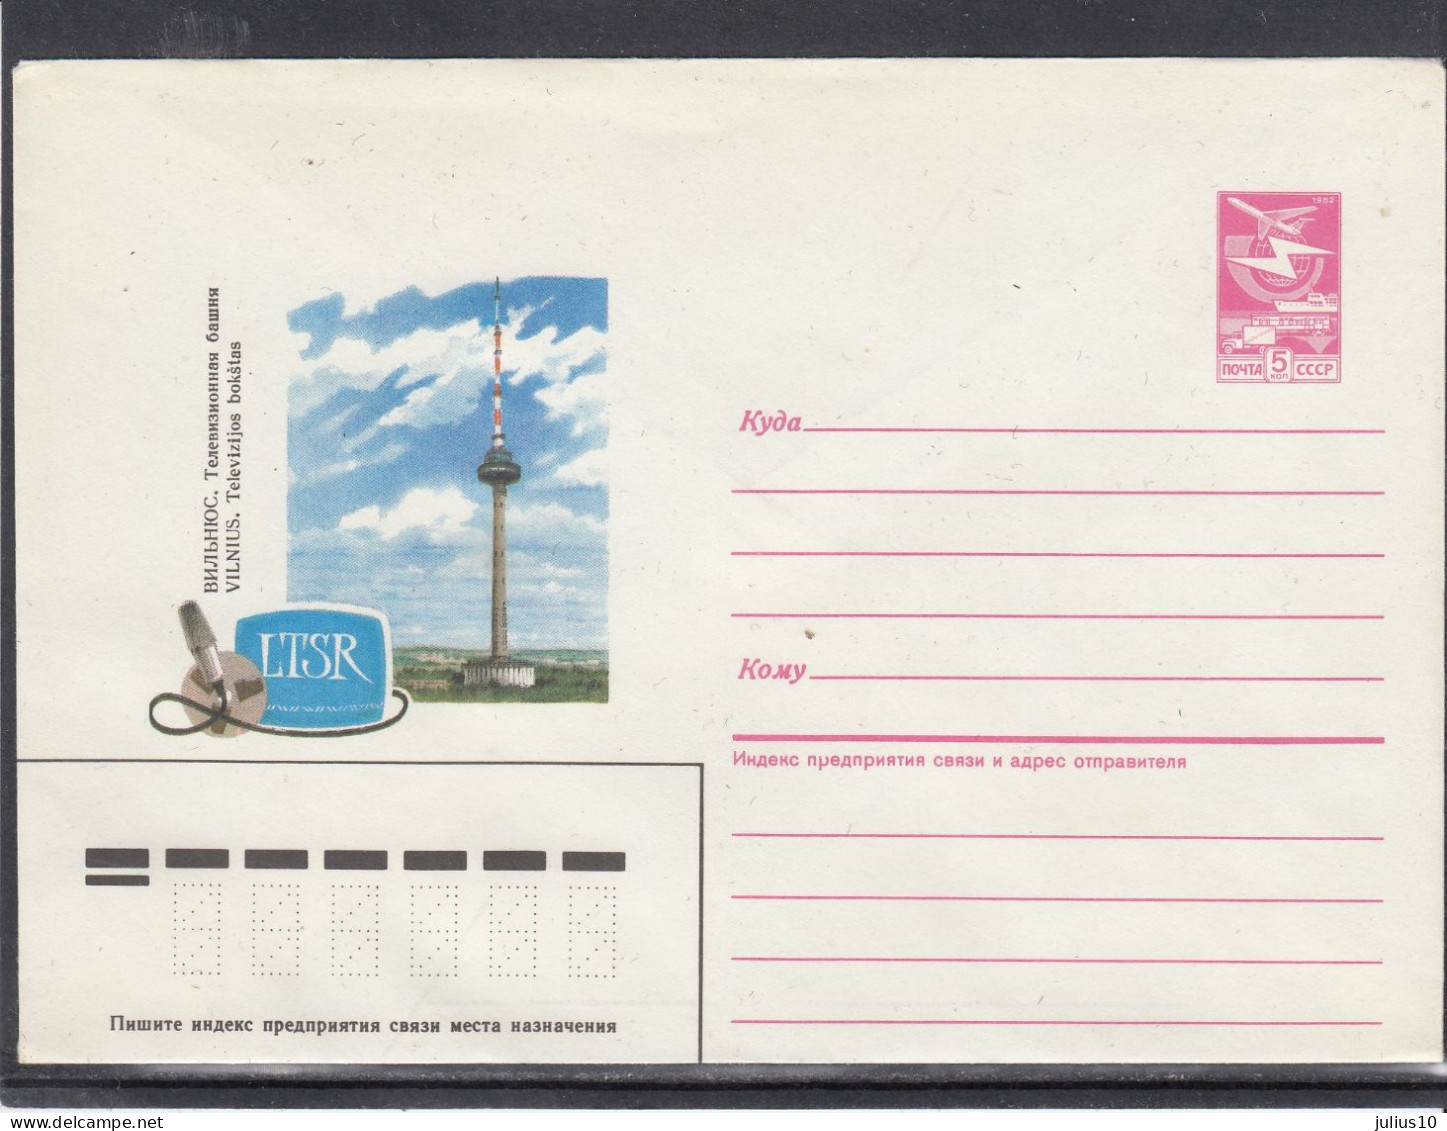 LITHUANIA (USSR) 1987 Cover Vilnius TelevisionTower #LTV170 - Lithuania